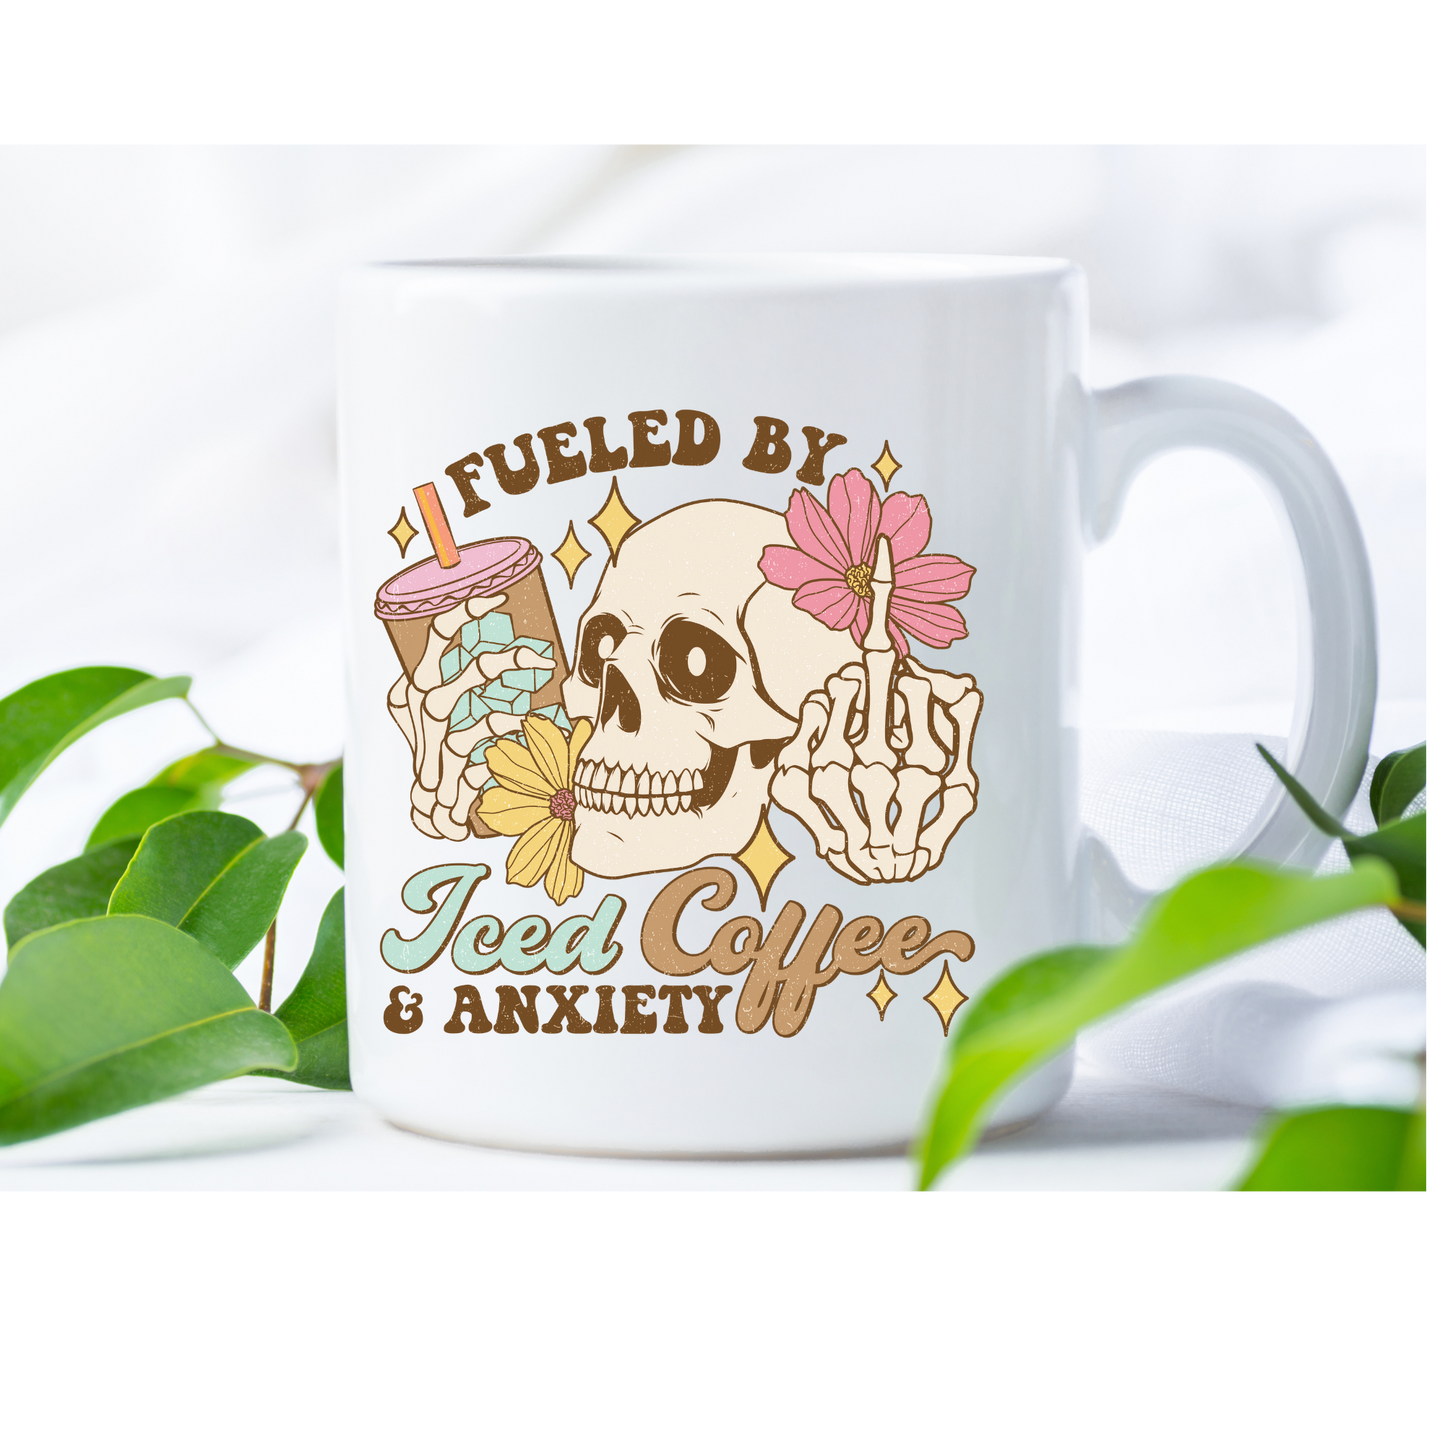 Unique Fuelled by Coffee and Anxiety Design Coffee Mug |11oz Tea Cup | Gift for Coffee Lovers